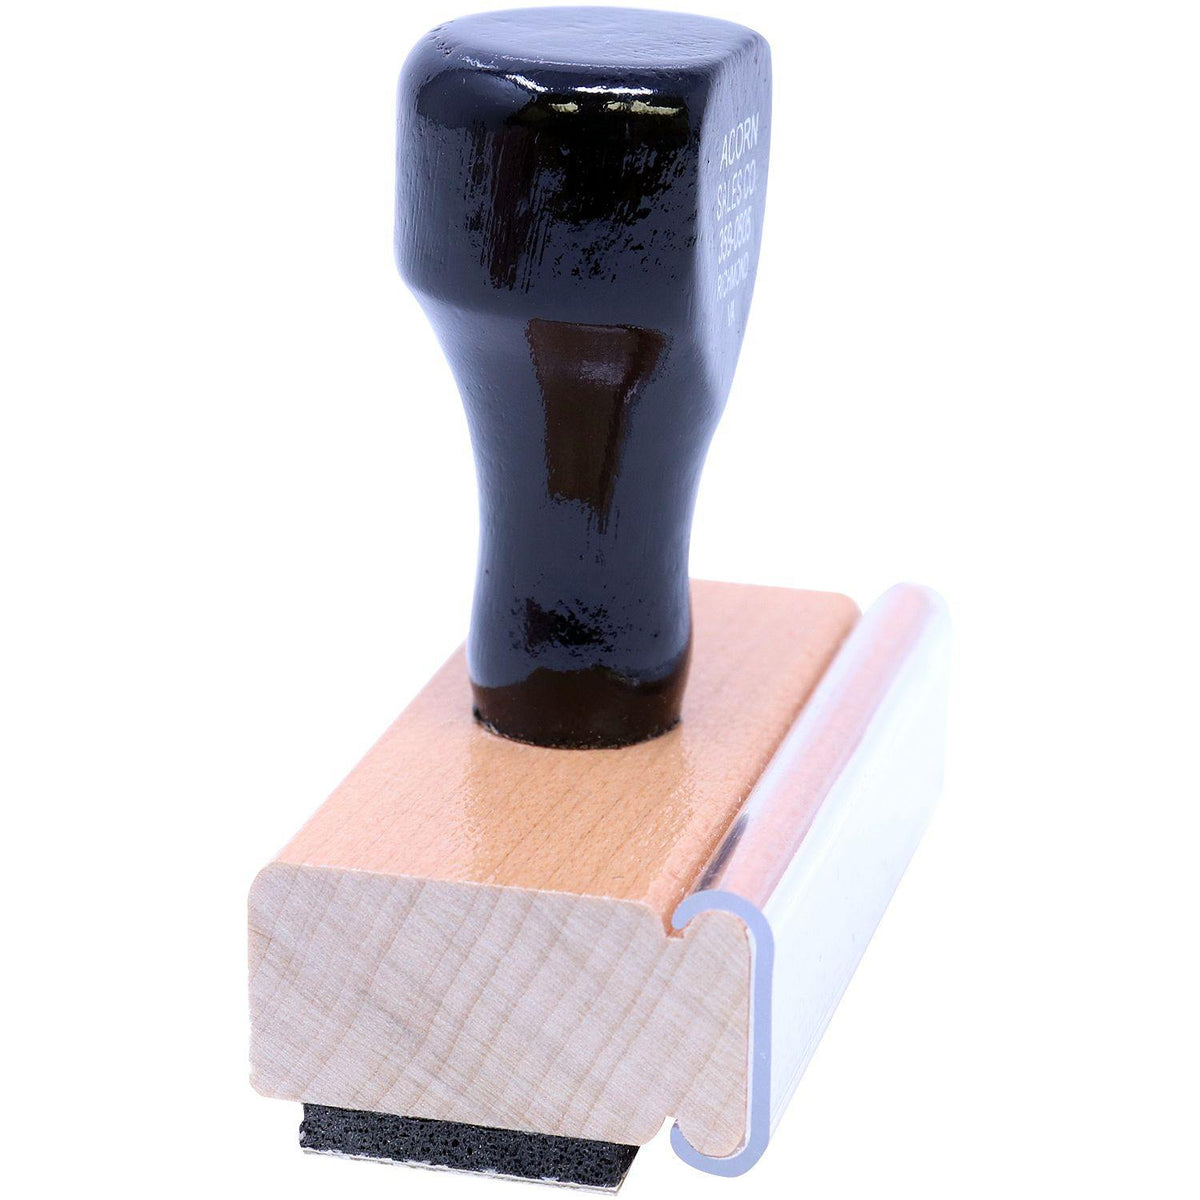 Side View of Investments Rubber Stamp at an Angle